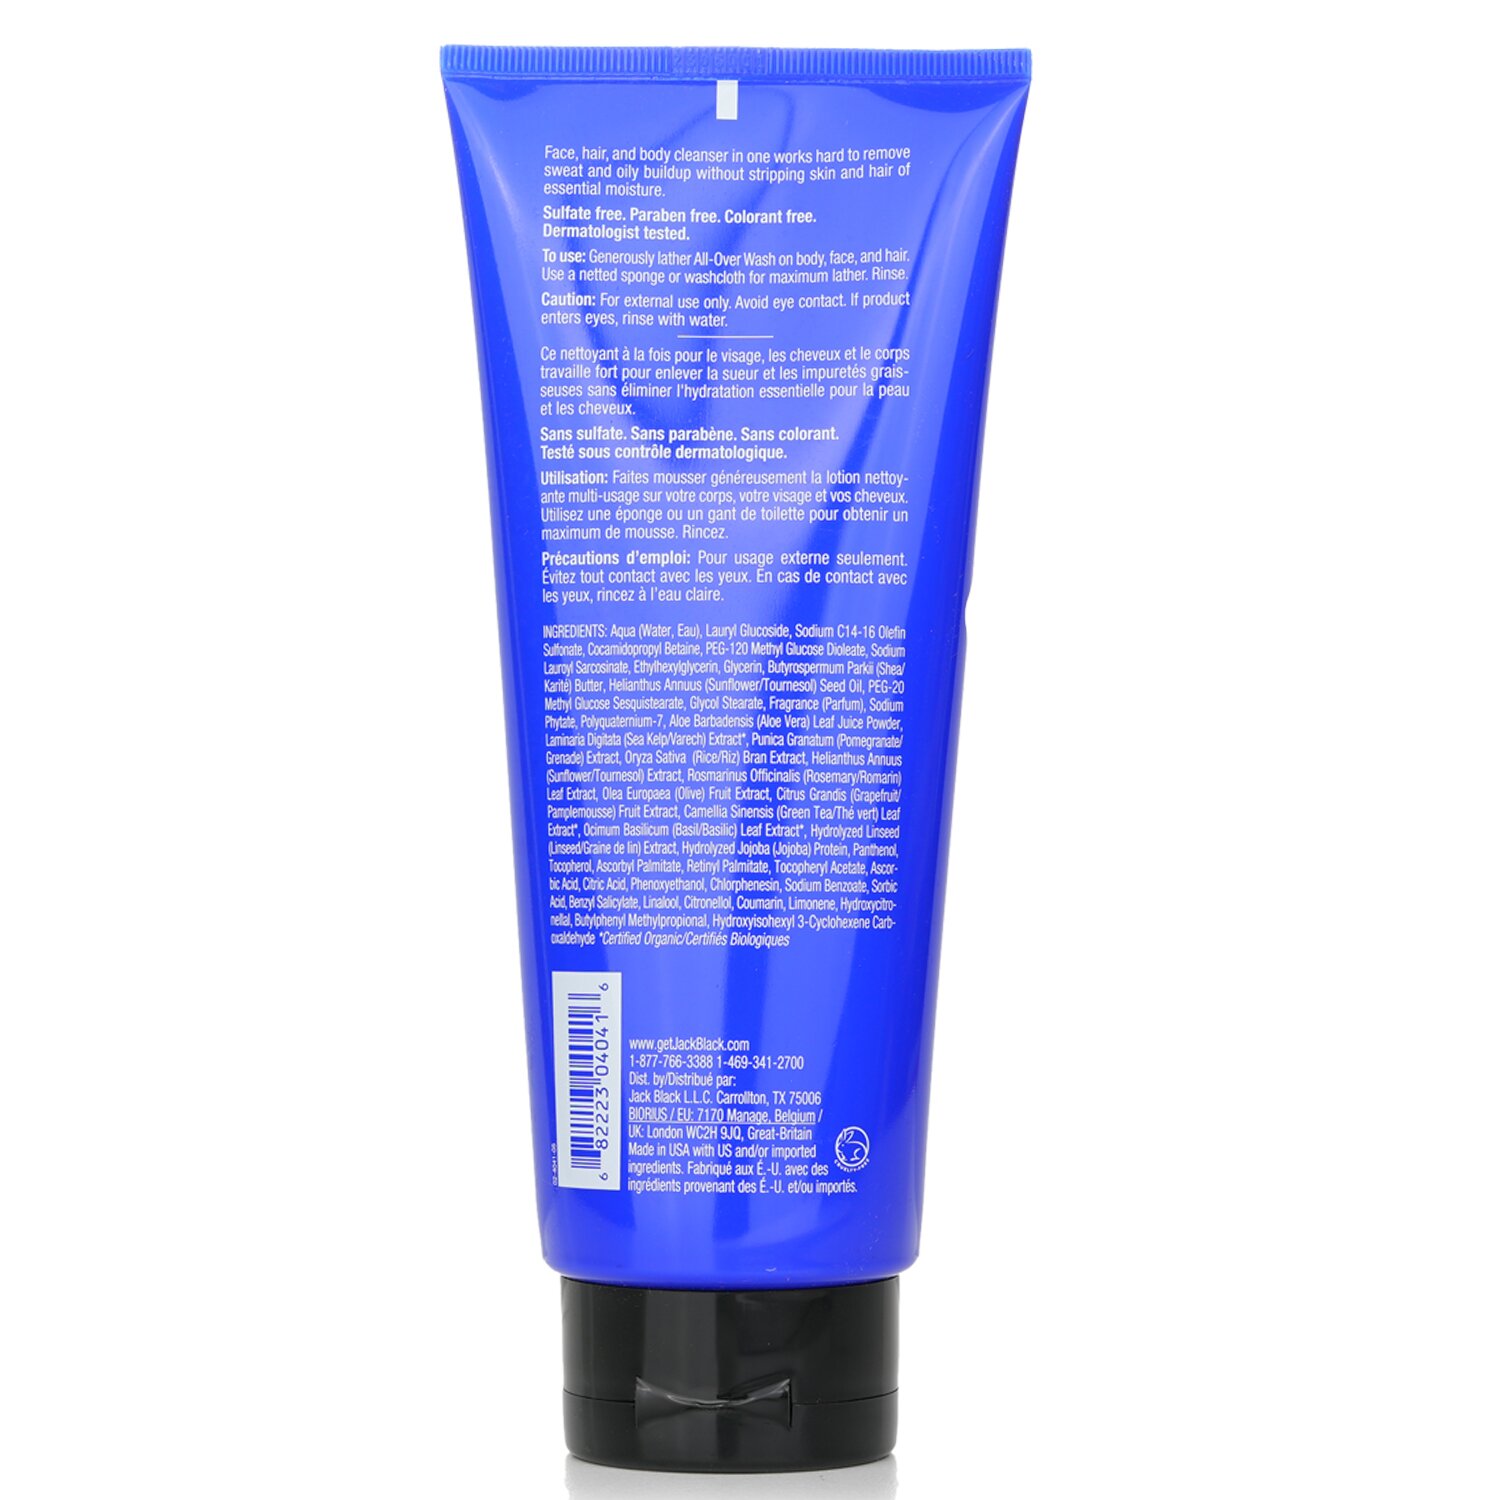 Jack Black All Over Wash for Face, Hair & Body 295ml/10oz